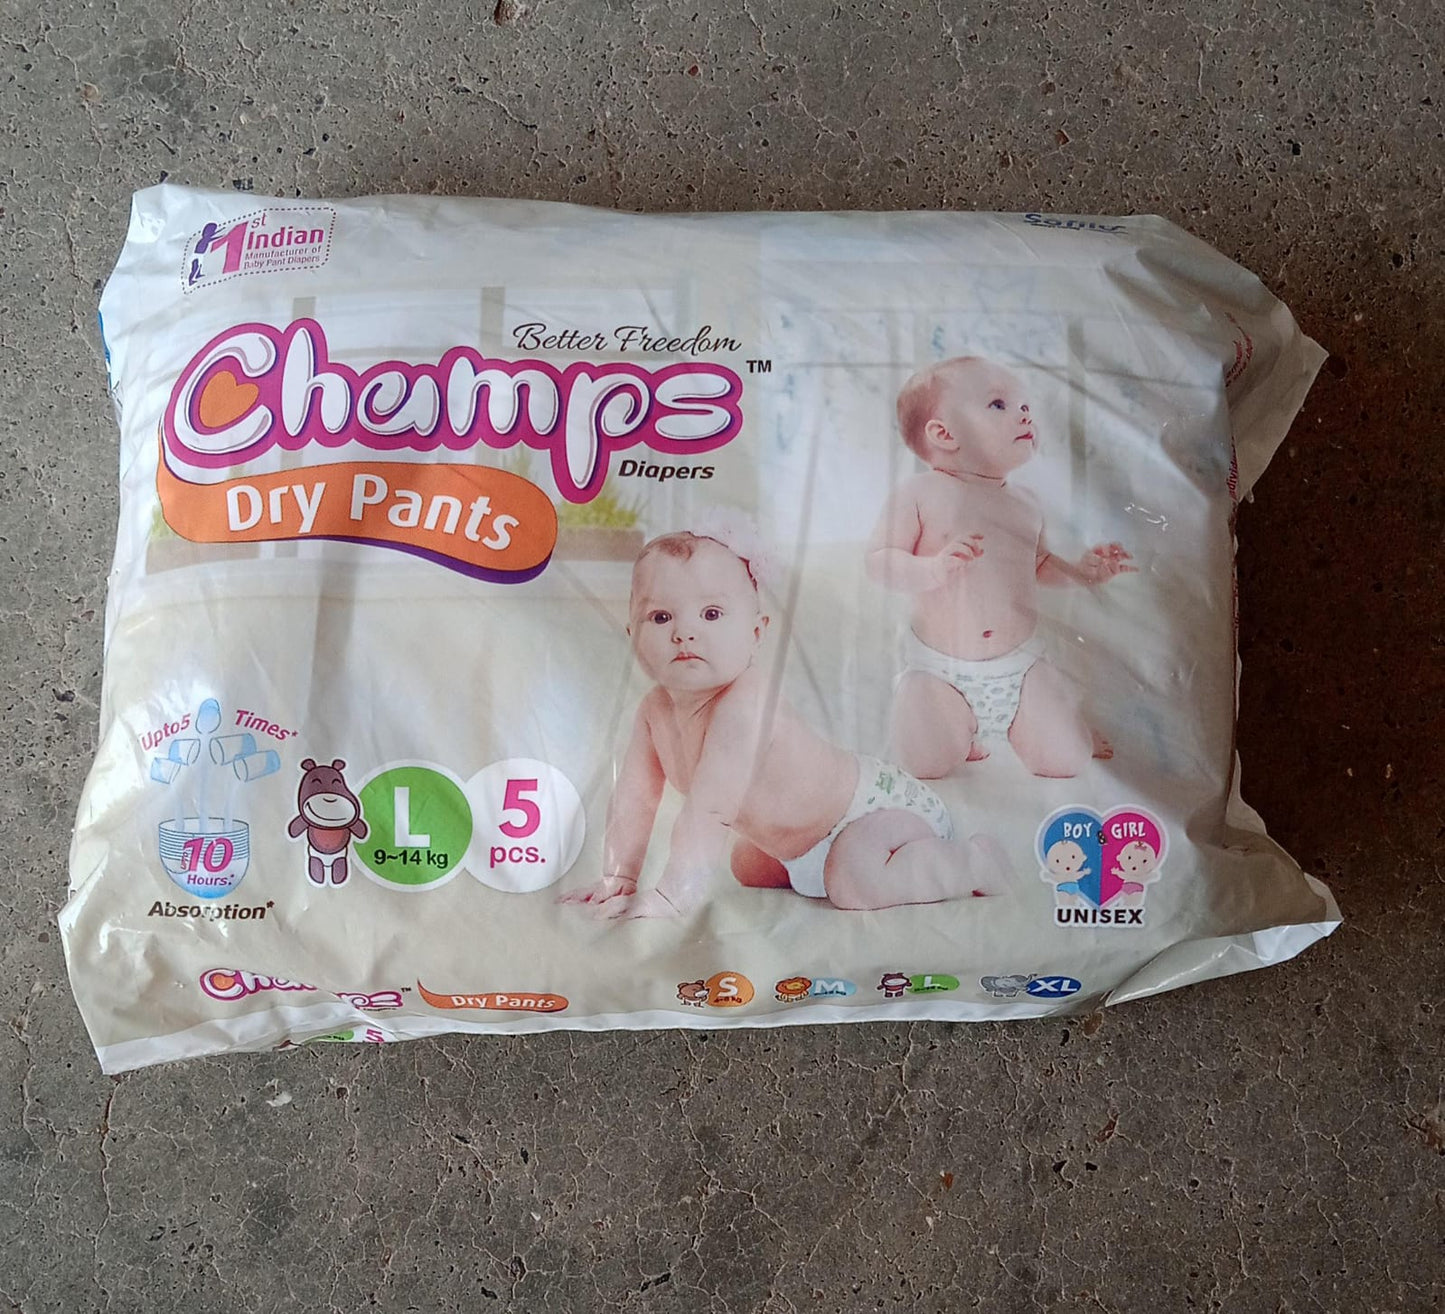 0967 Baby Diaper High Absorbent Pant Diapers,  Champs Soft and Dry Baby Diaper Pants S 5 Pcs (Large , L5 Pieces)